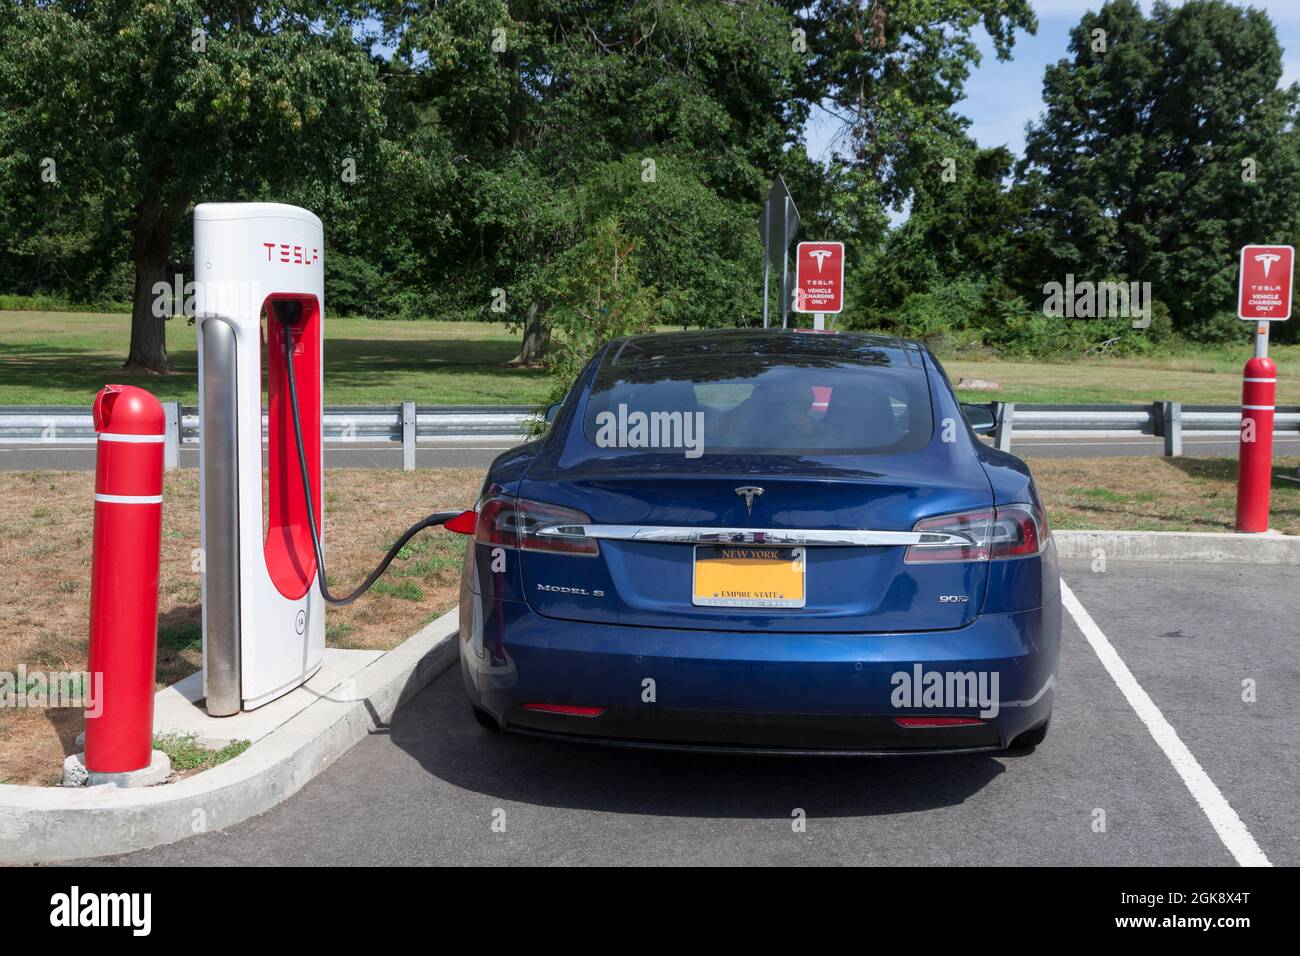 Tesla Car at Charging Station in New York State, United States. Stock Photo